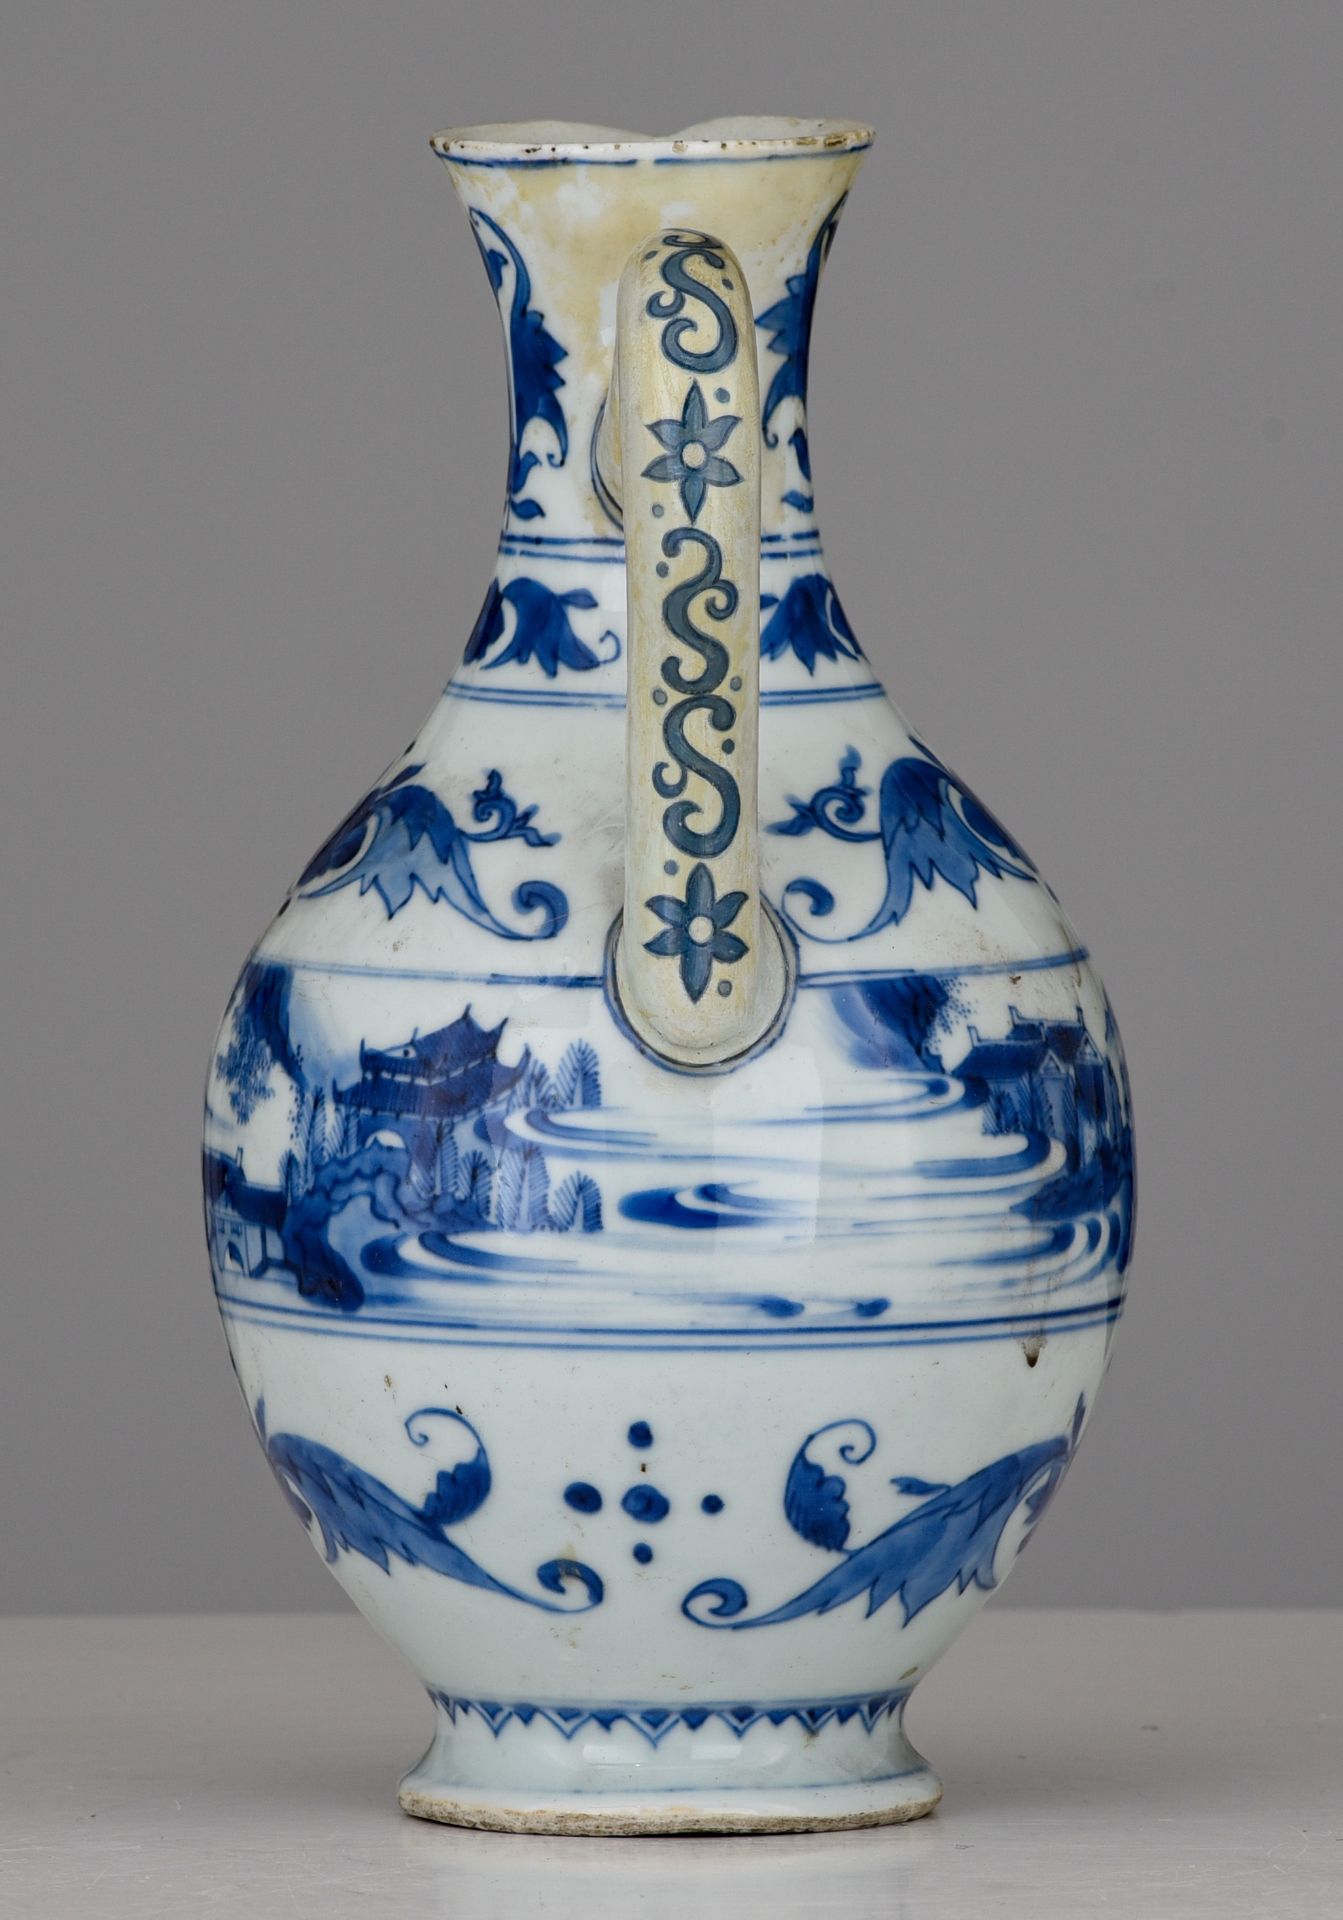 A Chinese blue and white jug, late 17thC/early 18thC, H 23,5 cm - Image 3 of 7